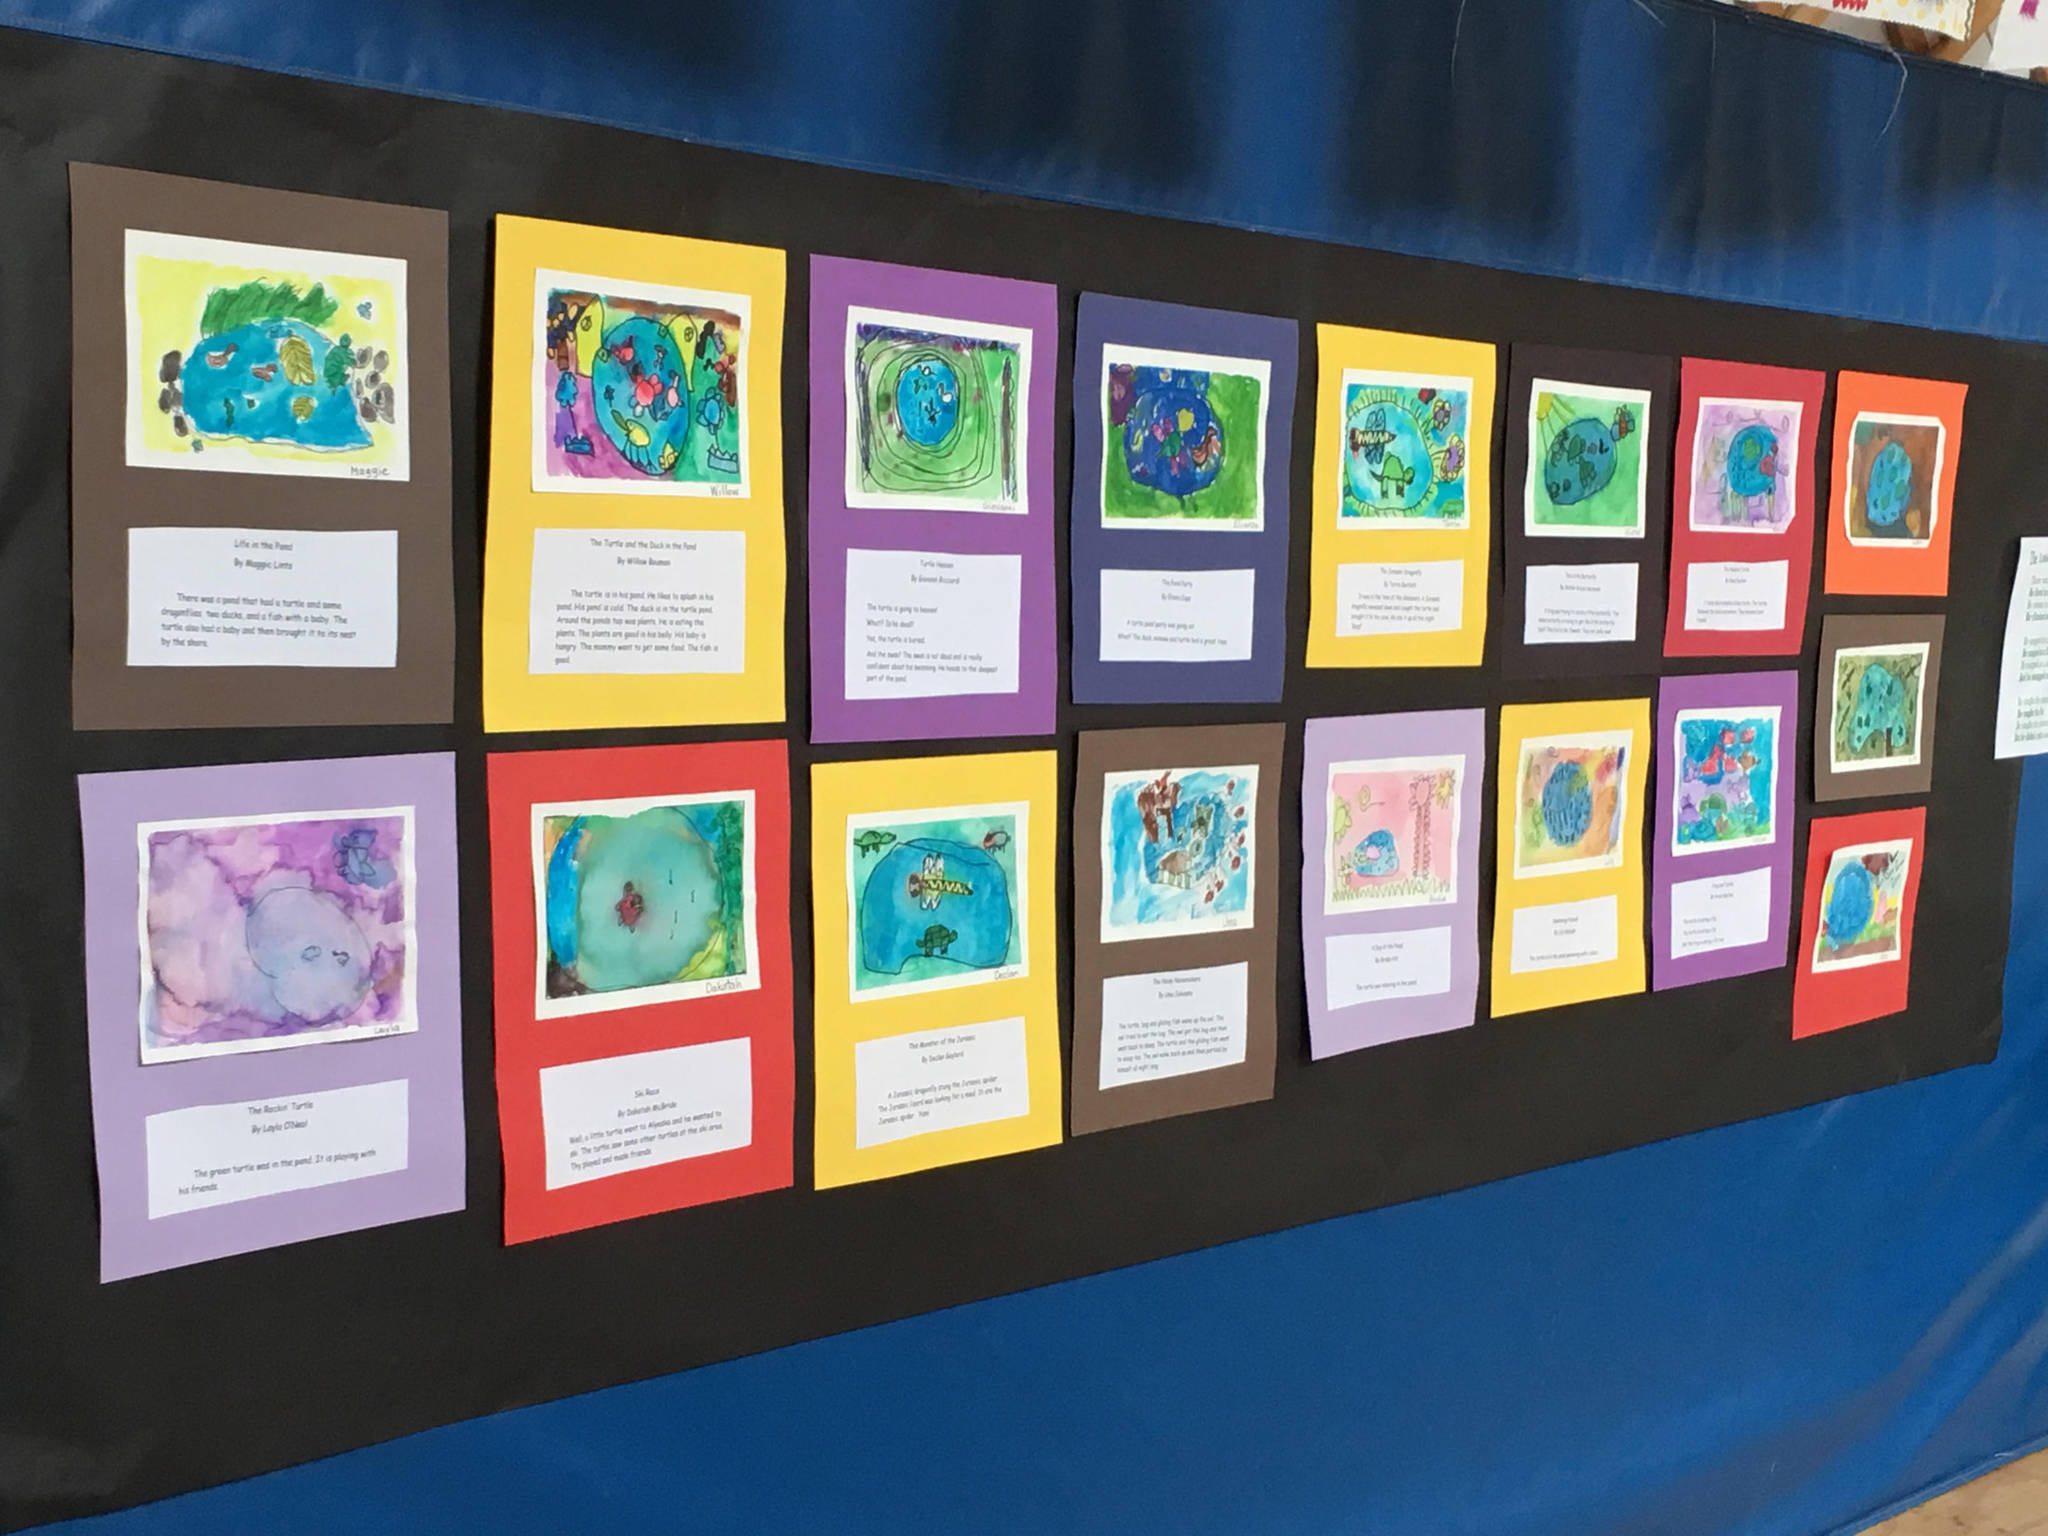 Artwork by students at Fireweed Academy line the wall on Friday, March 29, 2019 at the end of an art residency by Debbie Piper at Little Fireweed in Homer, Alaska. (Photo courtesy Adele Person)